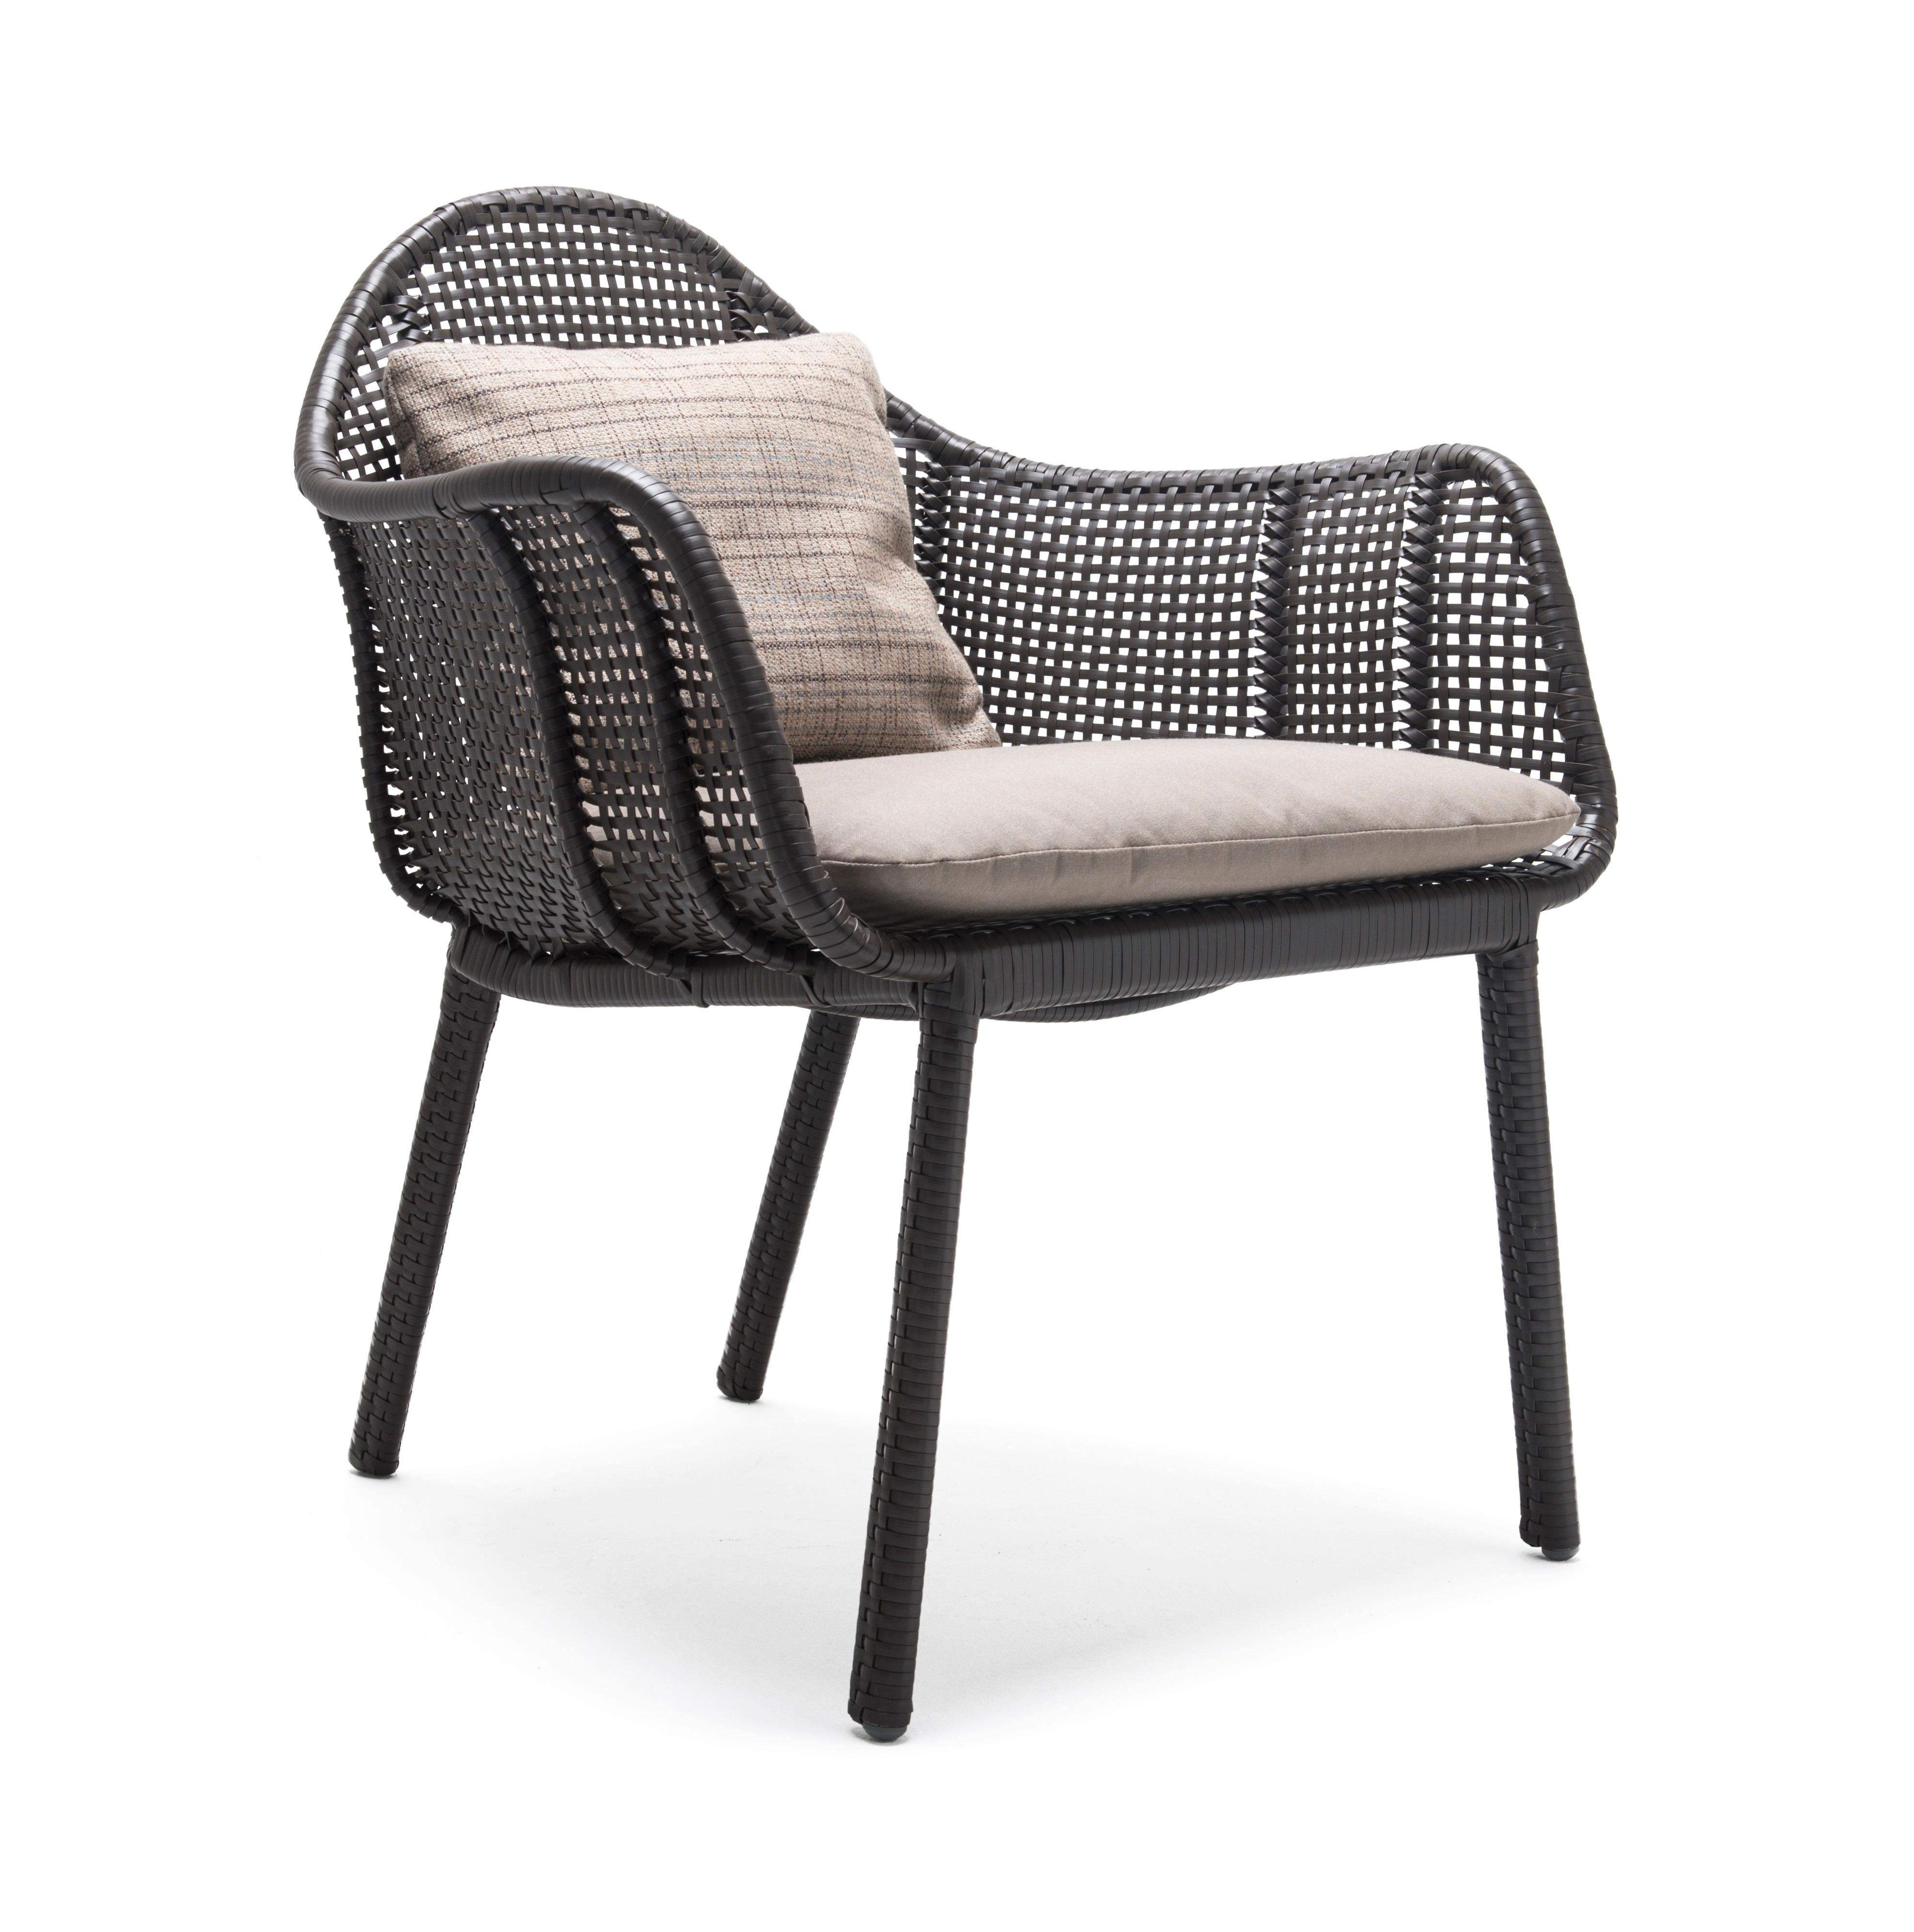 Marcel easy armchair by Kenneth Cobonpue.
Materials: Polyethelene, Aluminum. 
Dimensions: 65cm x 69cm x H 80cm 

The Marcel collection complements any outdoor space with pieces that are made for comfort. Made of polyethylene and steel, this